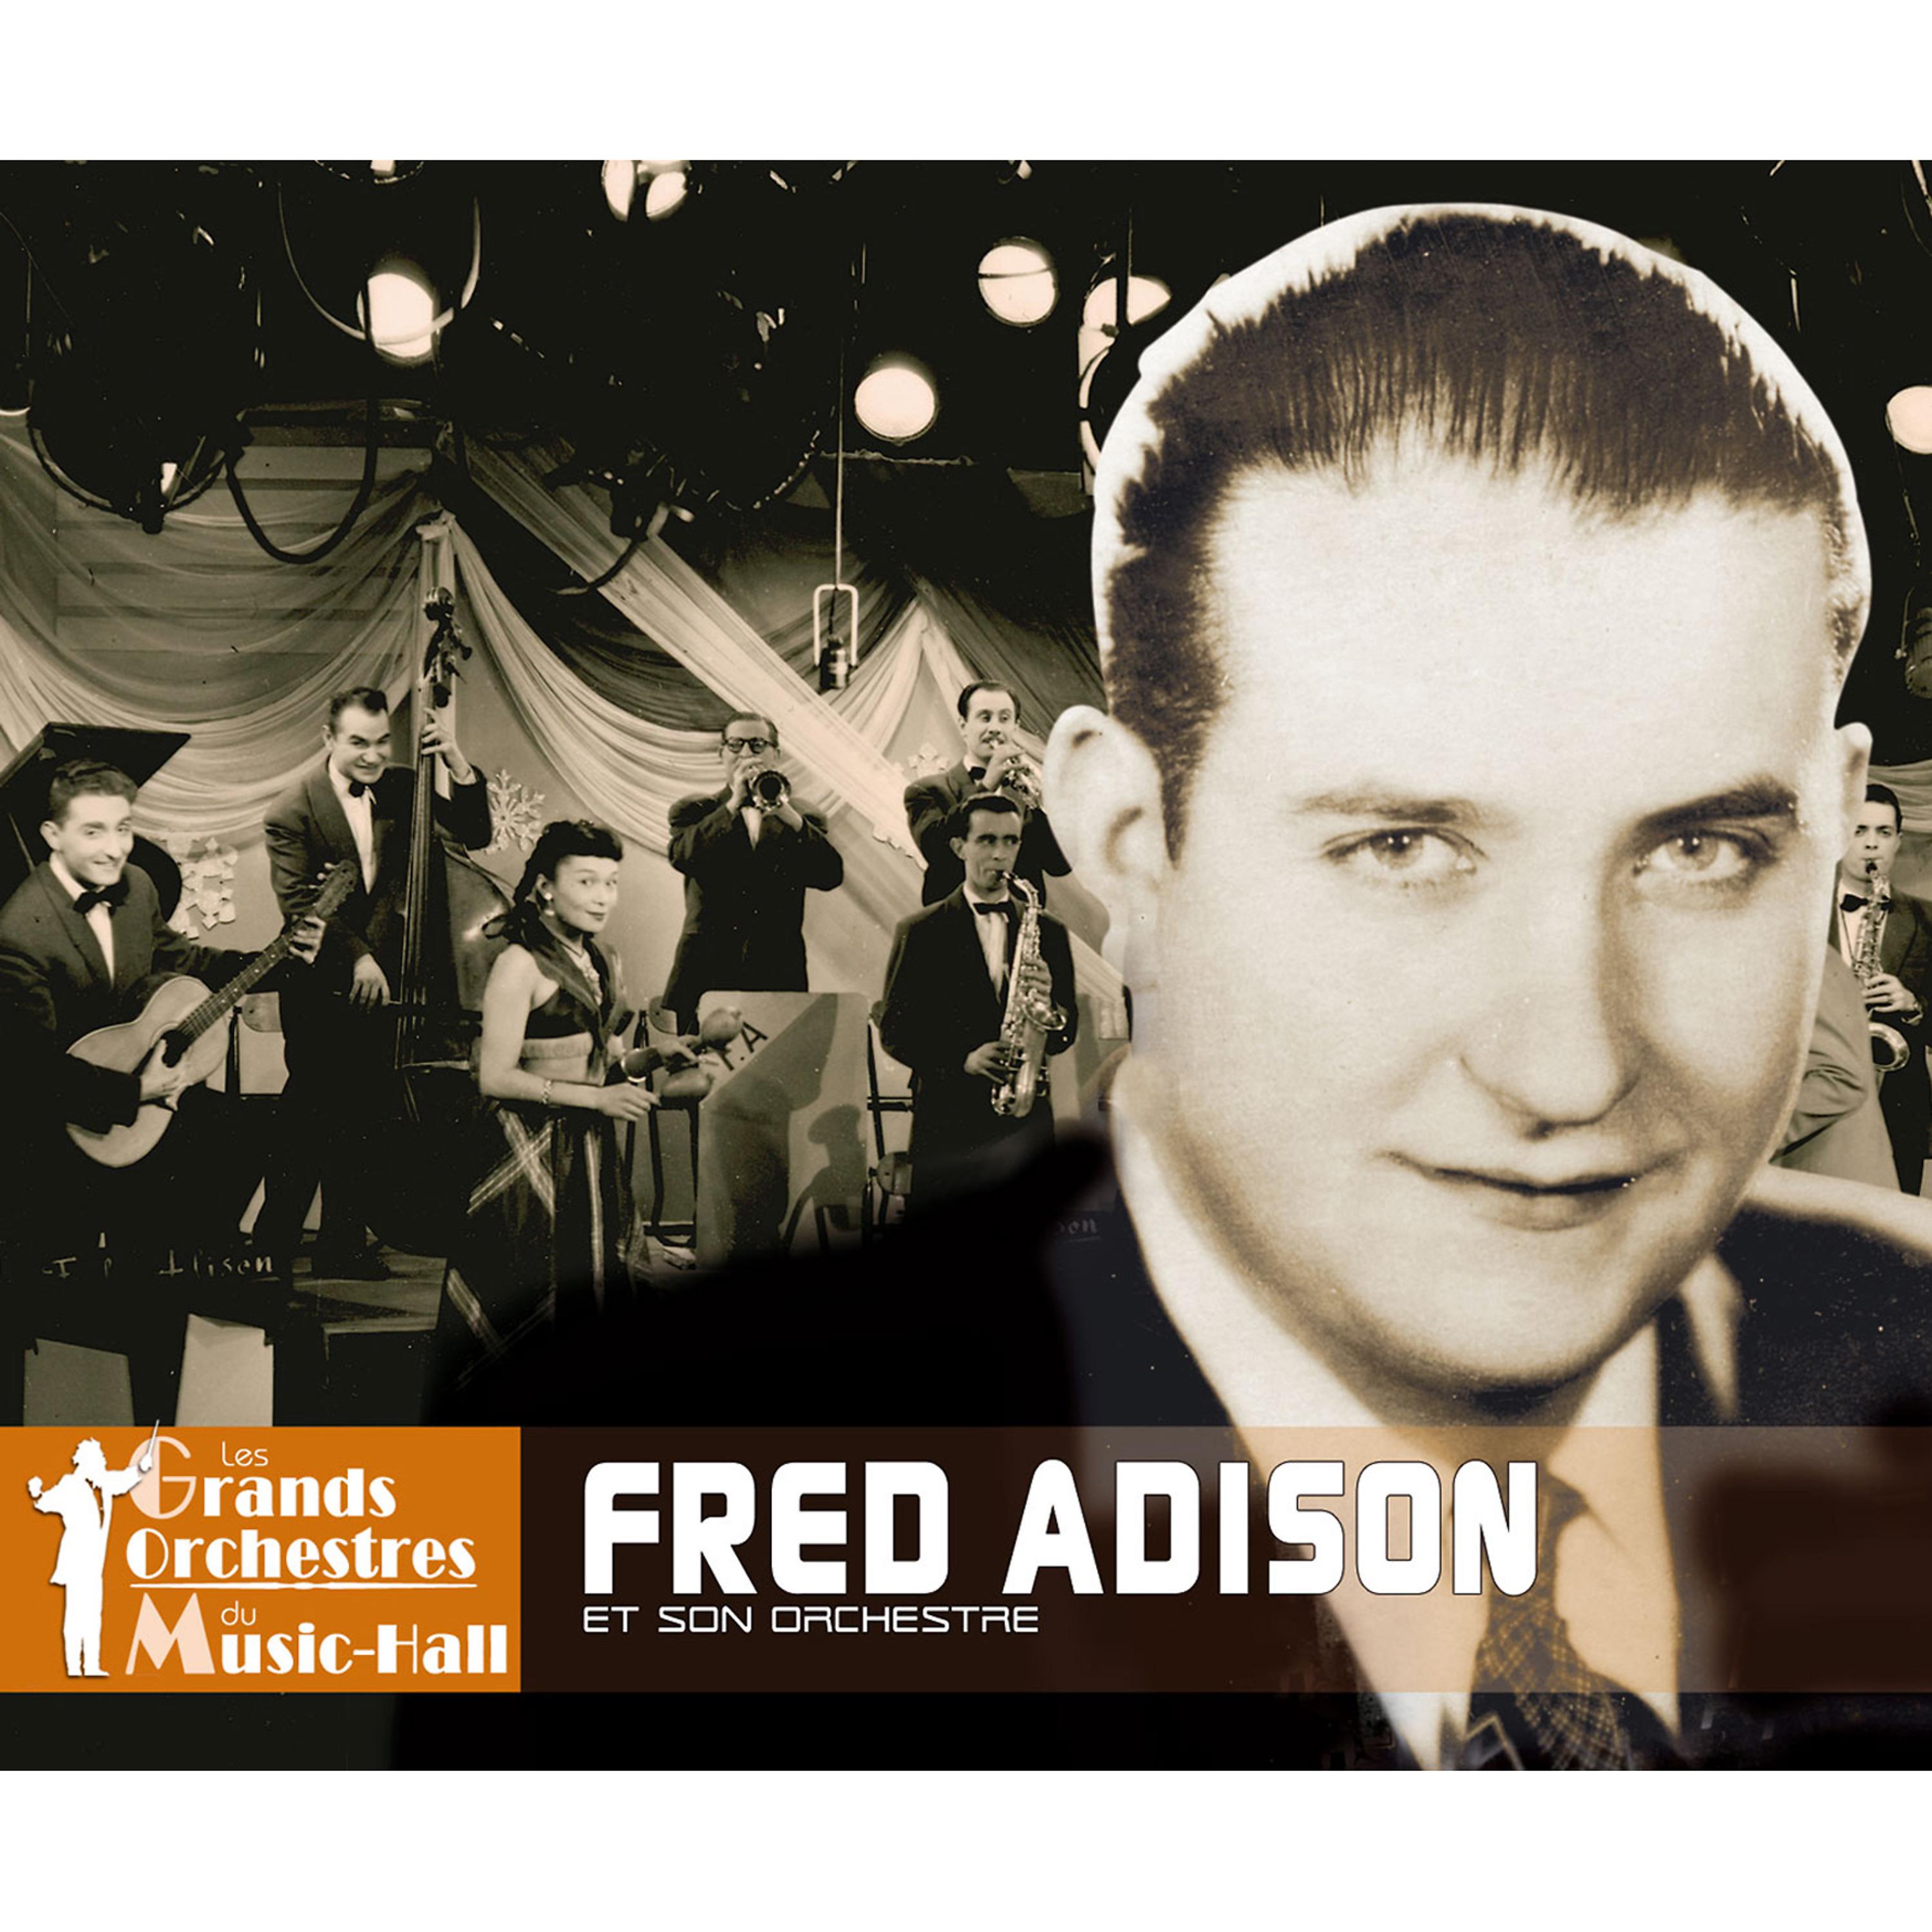 Постер альбома Fred Adison et son orchestre (Collection "Les grands orchestres du music-hall")